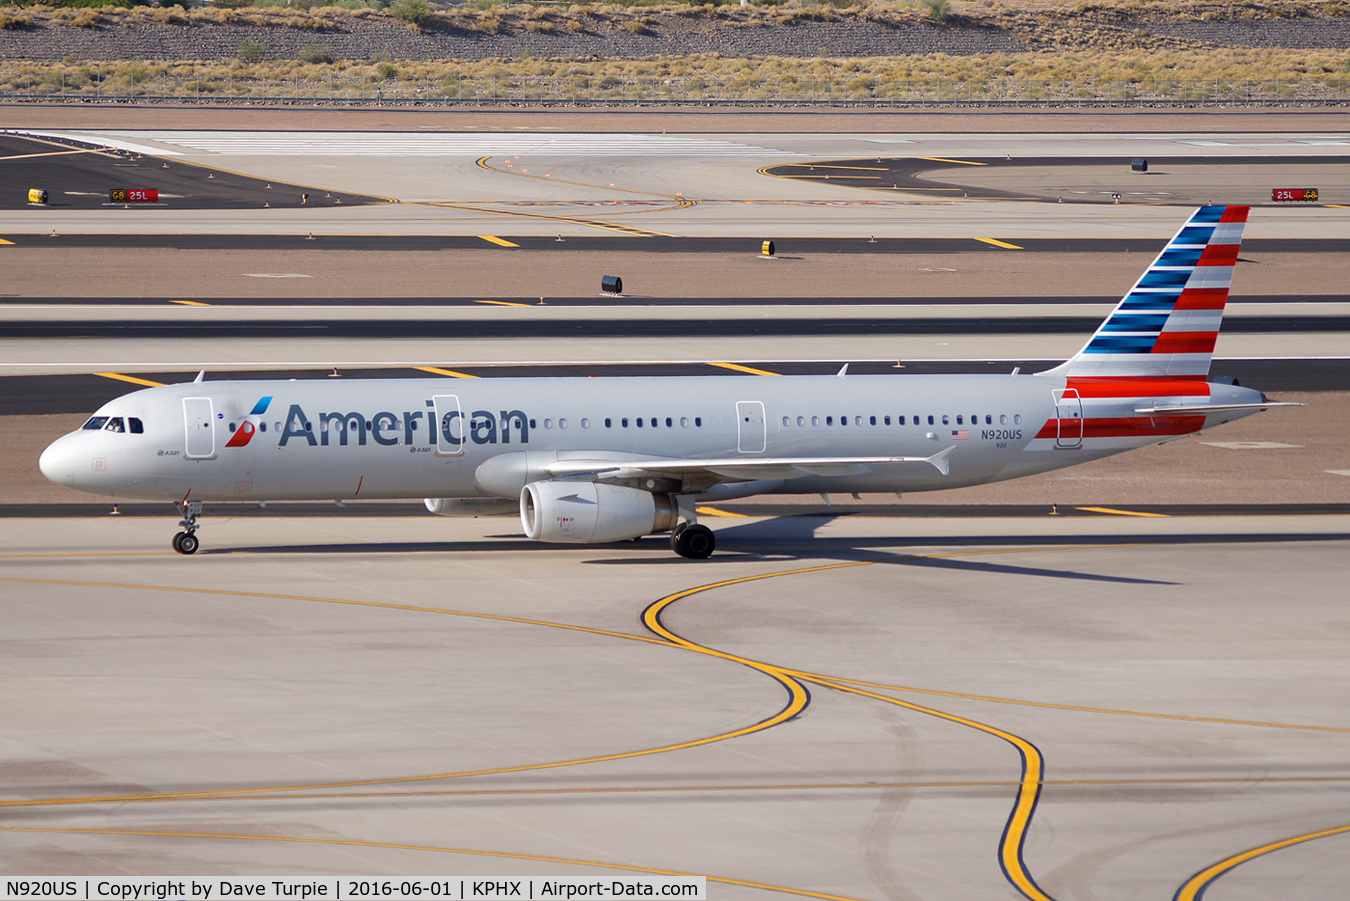 N920US, 2015 Airbus A321-231 C/N 6490, No comment.